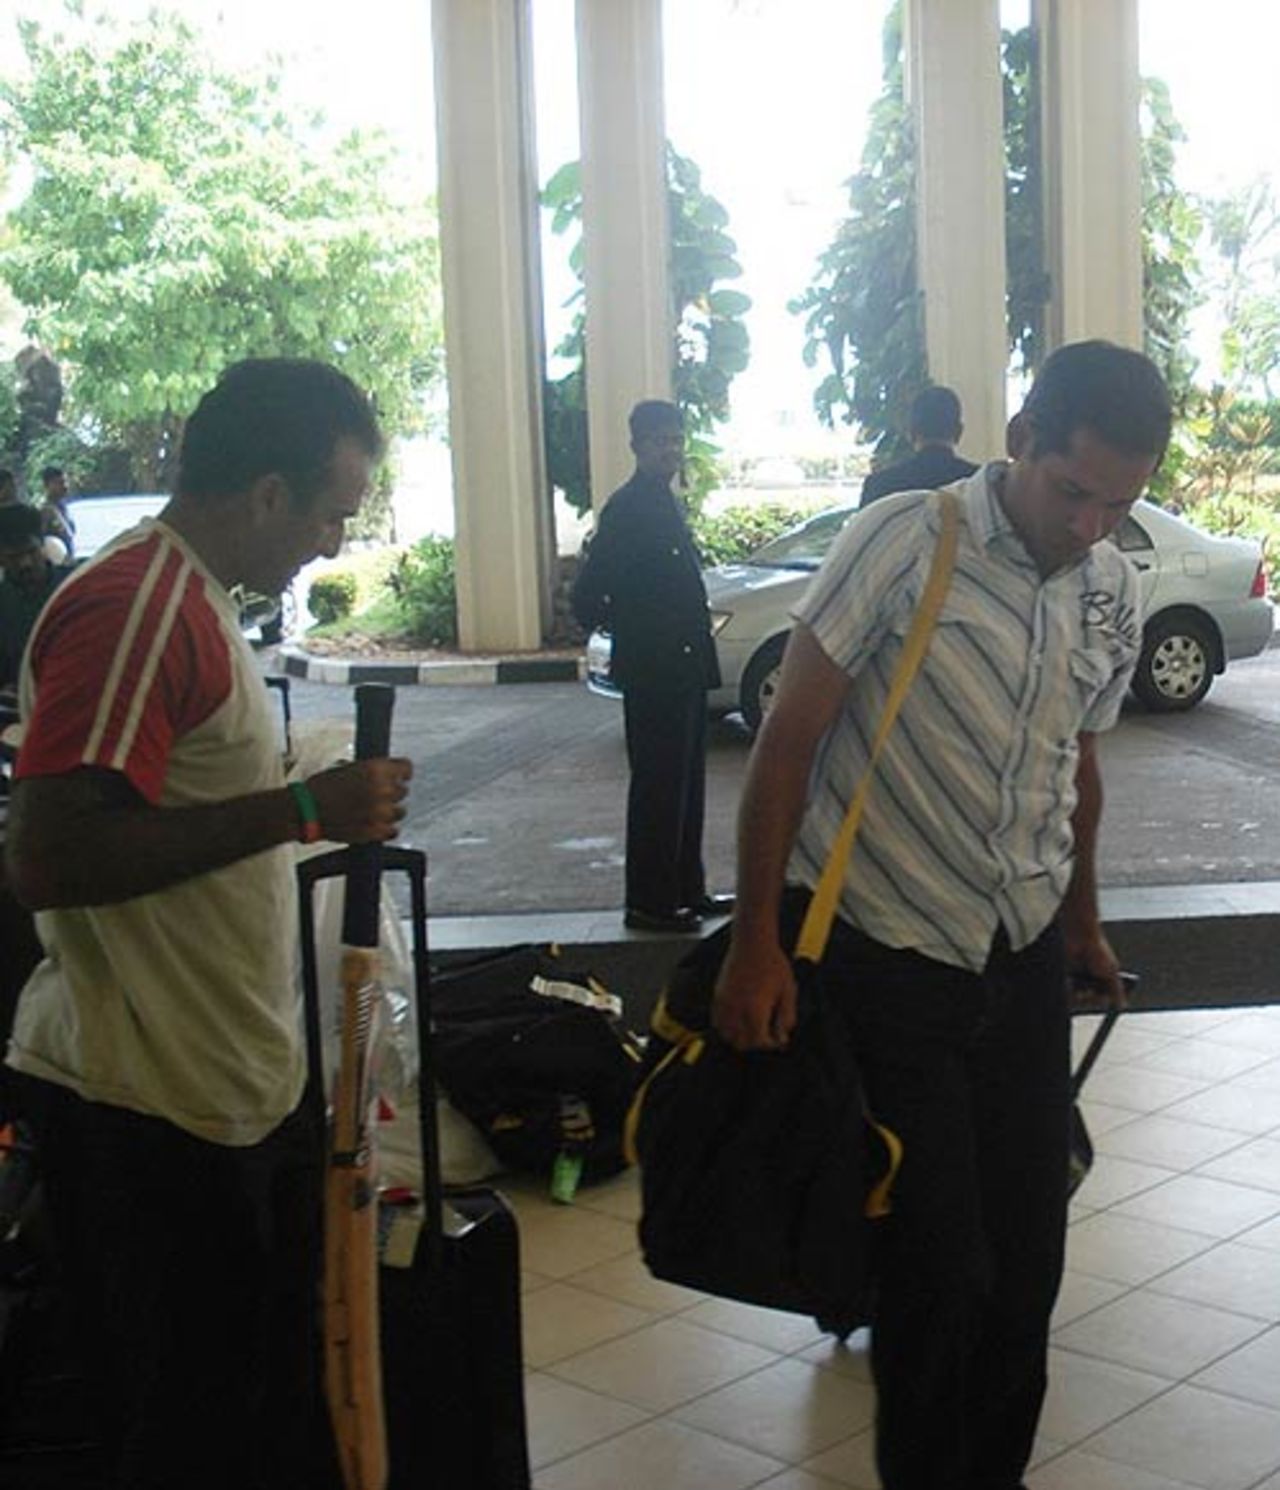 Javed Omar and Habibul Bashar arrive at the team hotel in Colombo, July 15, 2007